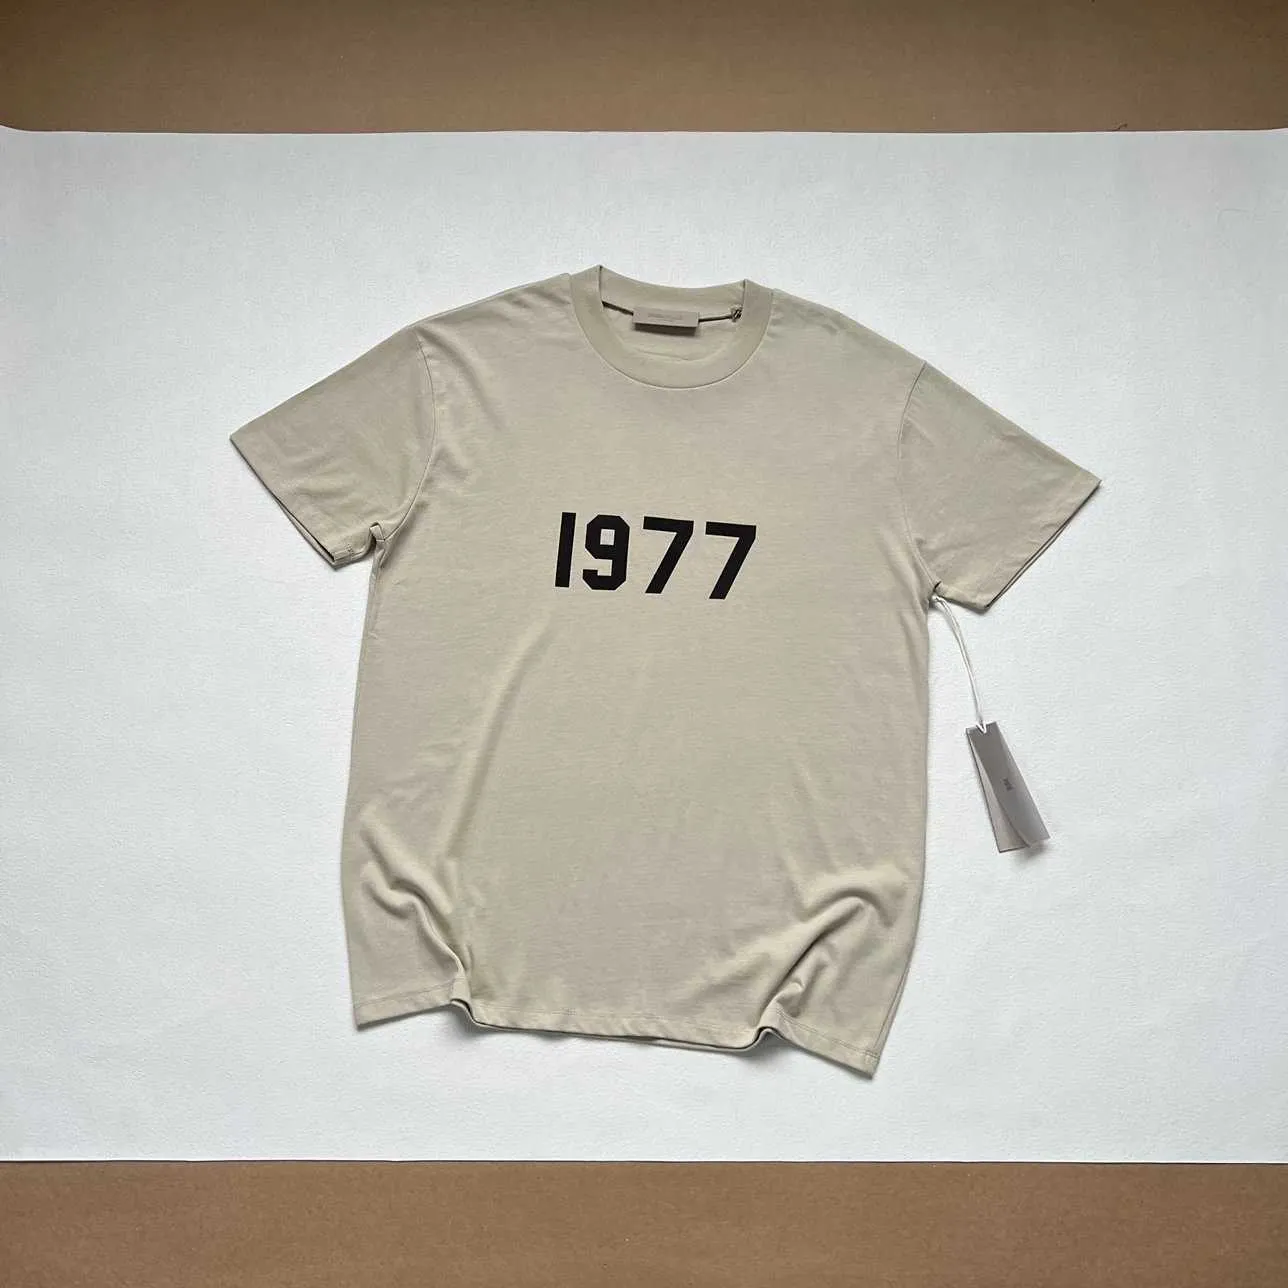   double thread 1977 flocked printed short sleeved T-shirt for both men and women